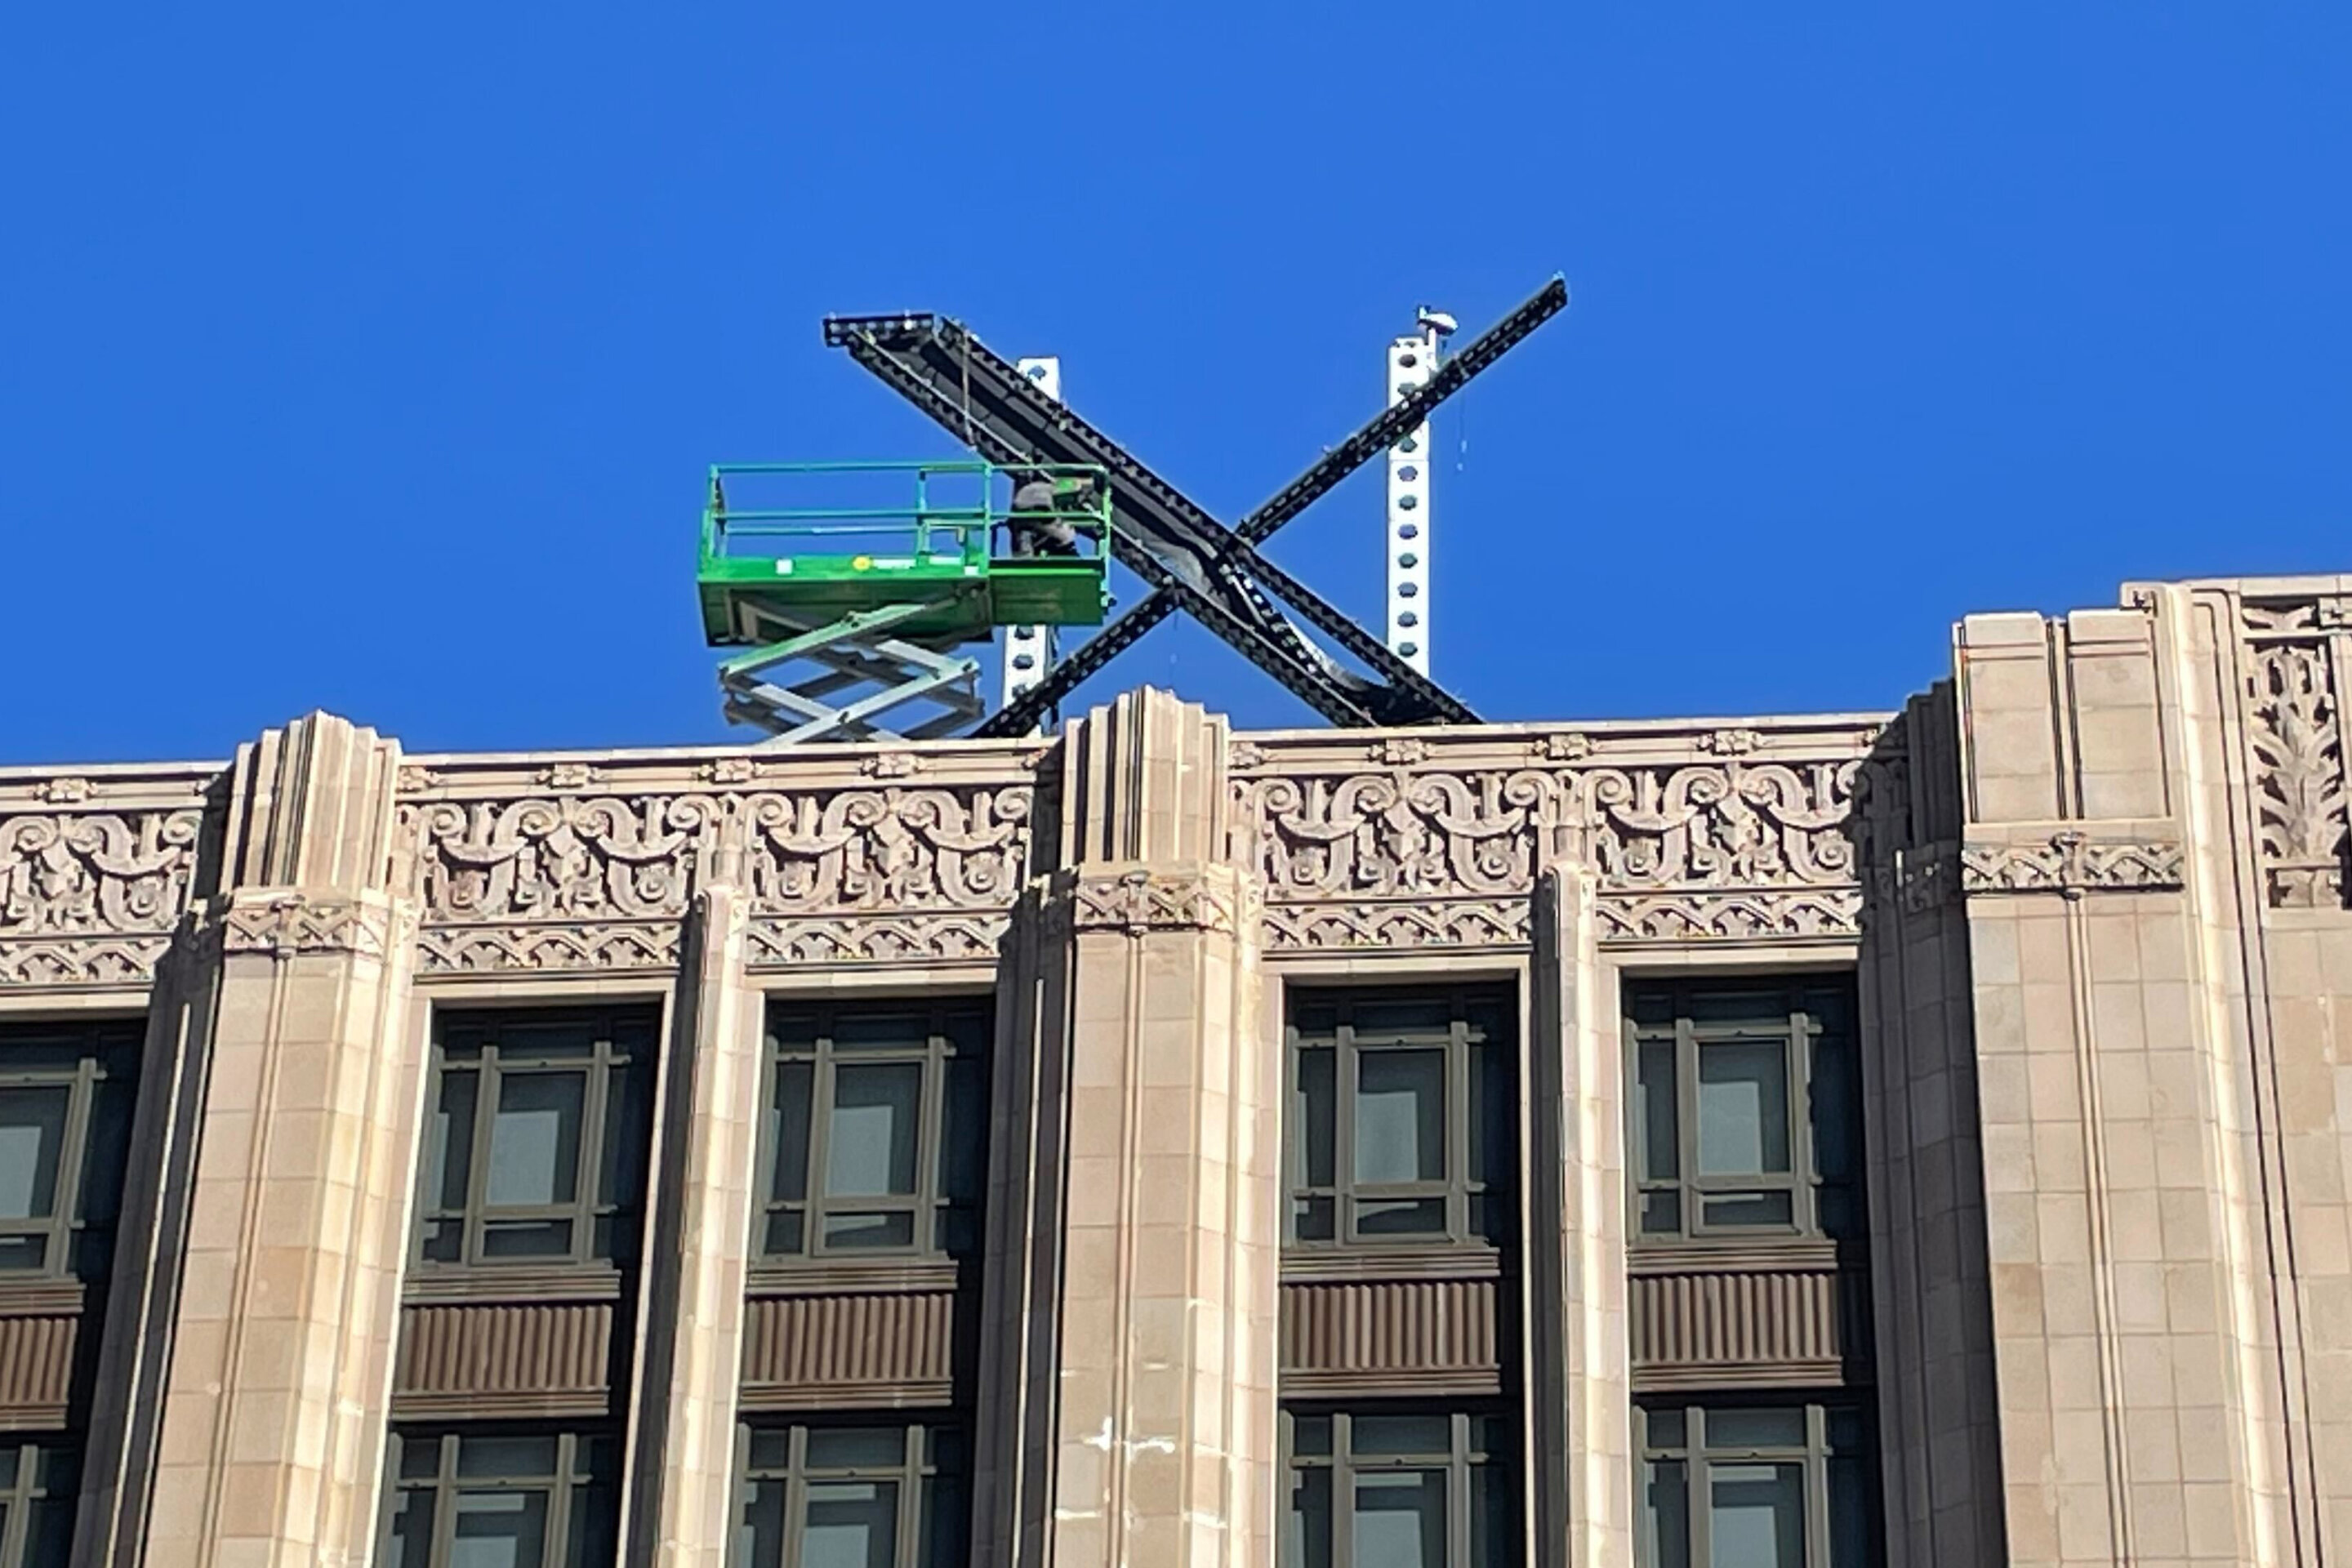 ‘X’ logo installed atop Twitter building, spurring San Francisco to investigate permit violation